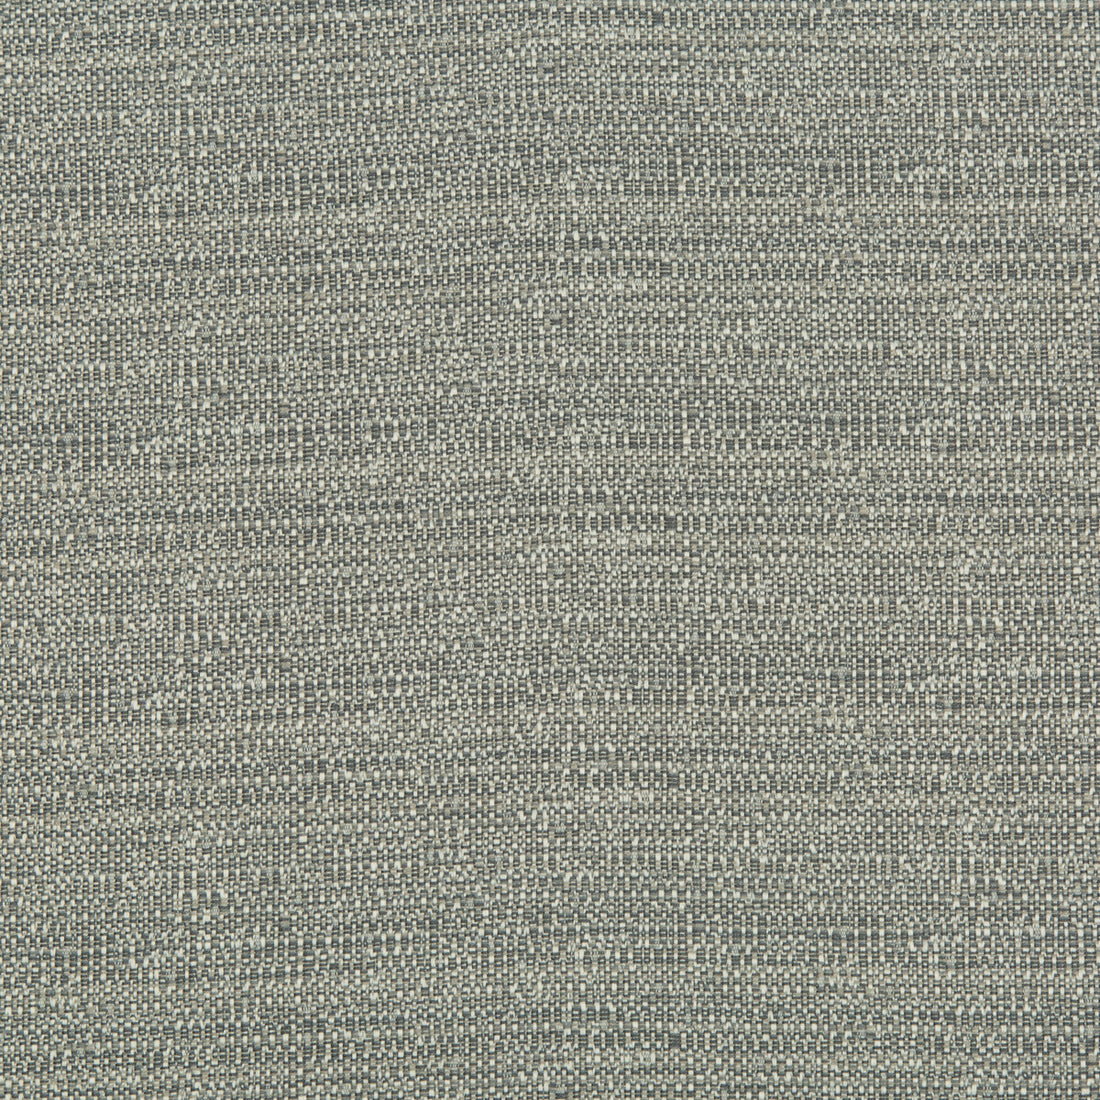 Kravet Design fabric in 35140-11 color - pattern 35140.11.0 - by Kravet Design in the Performance Crypton Home collection